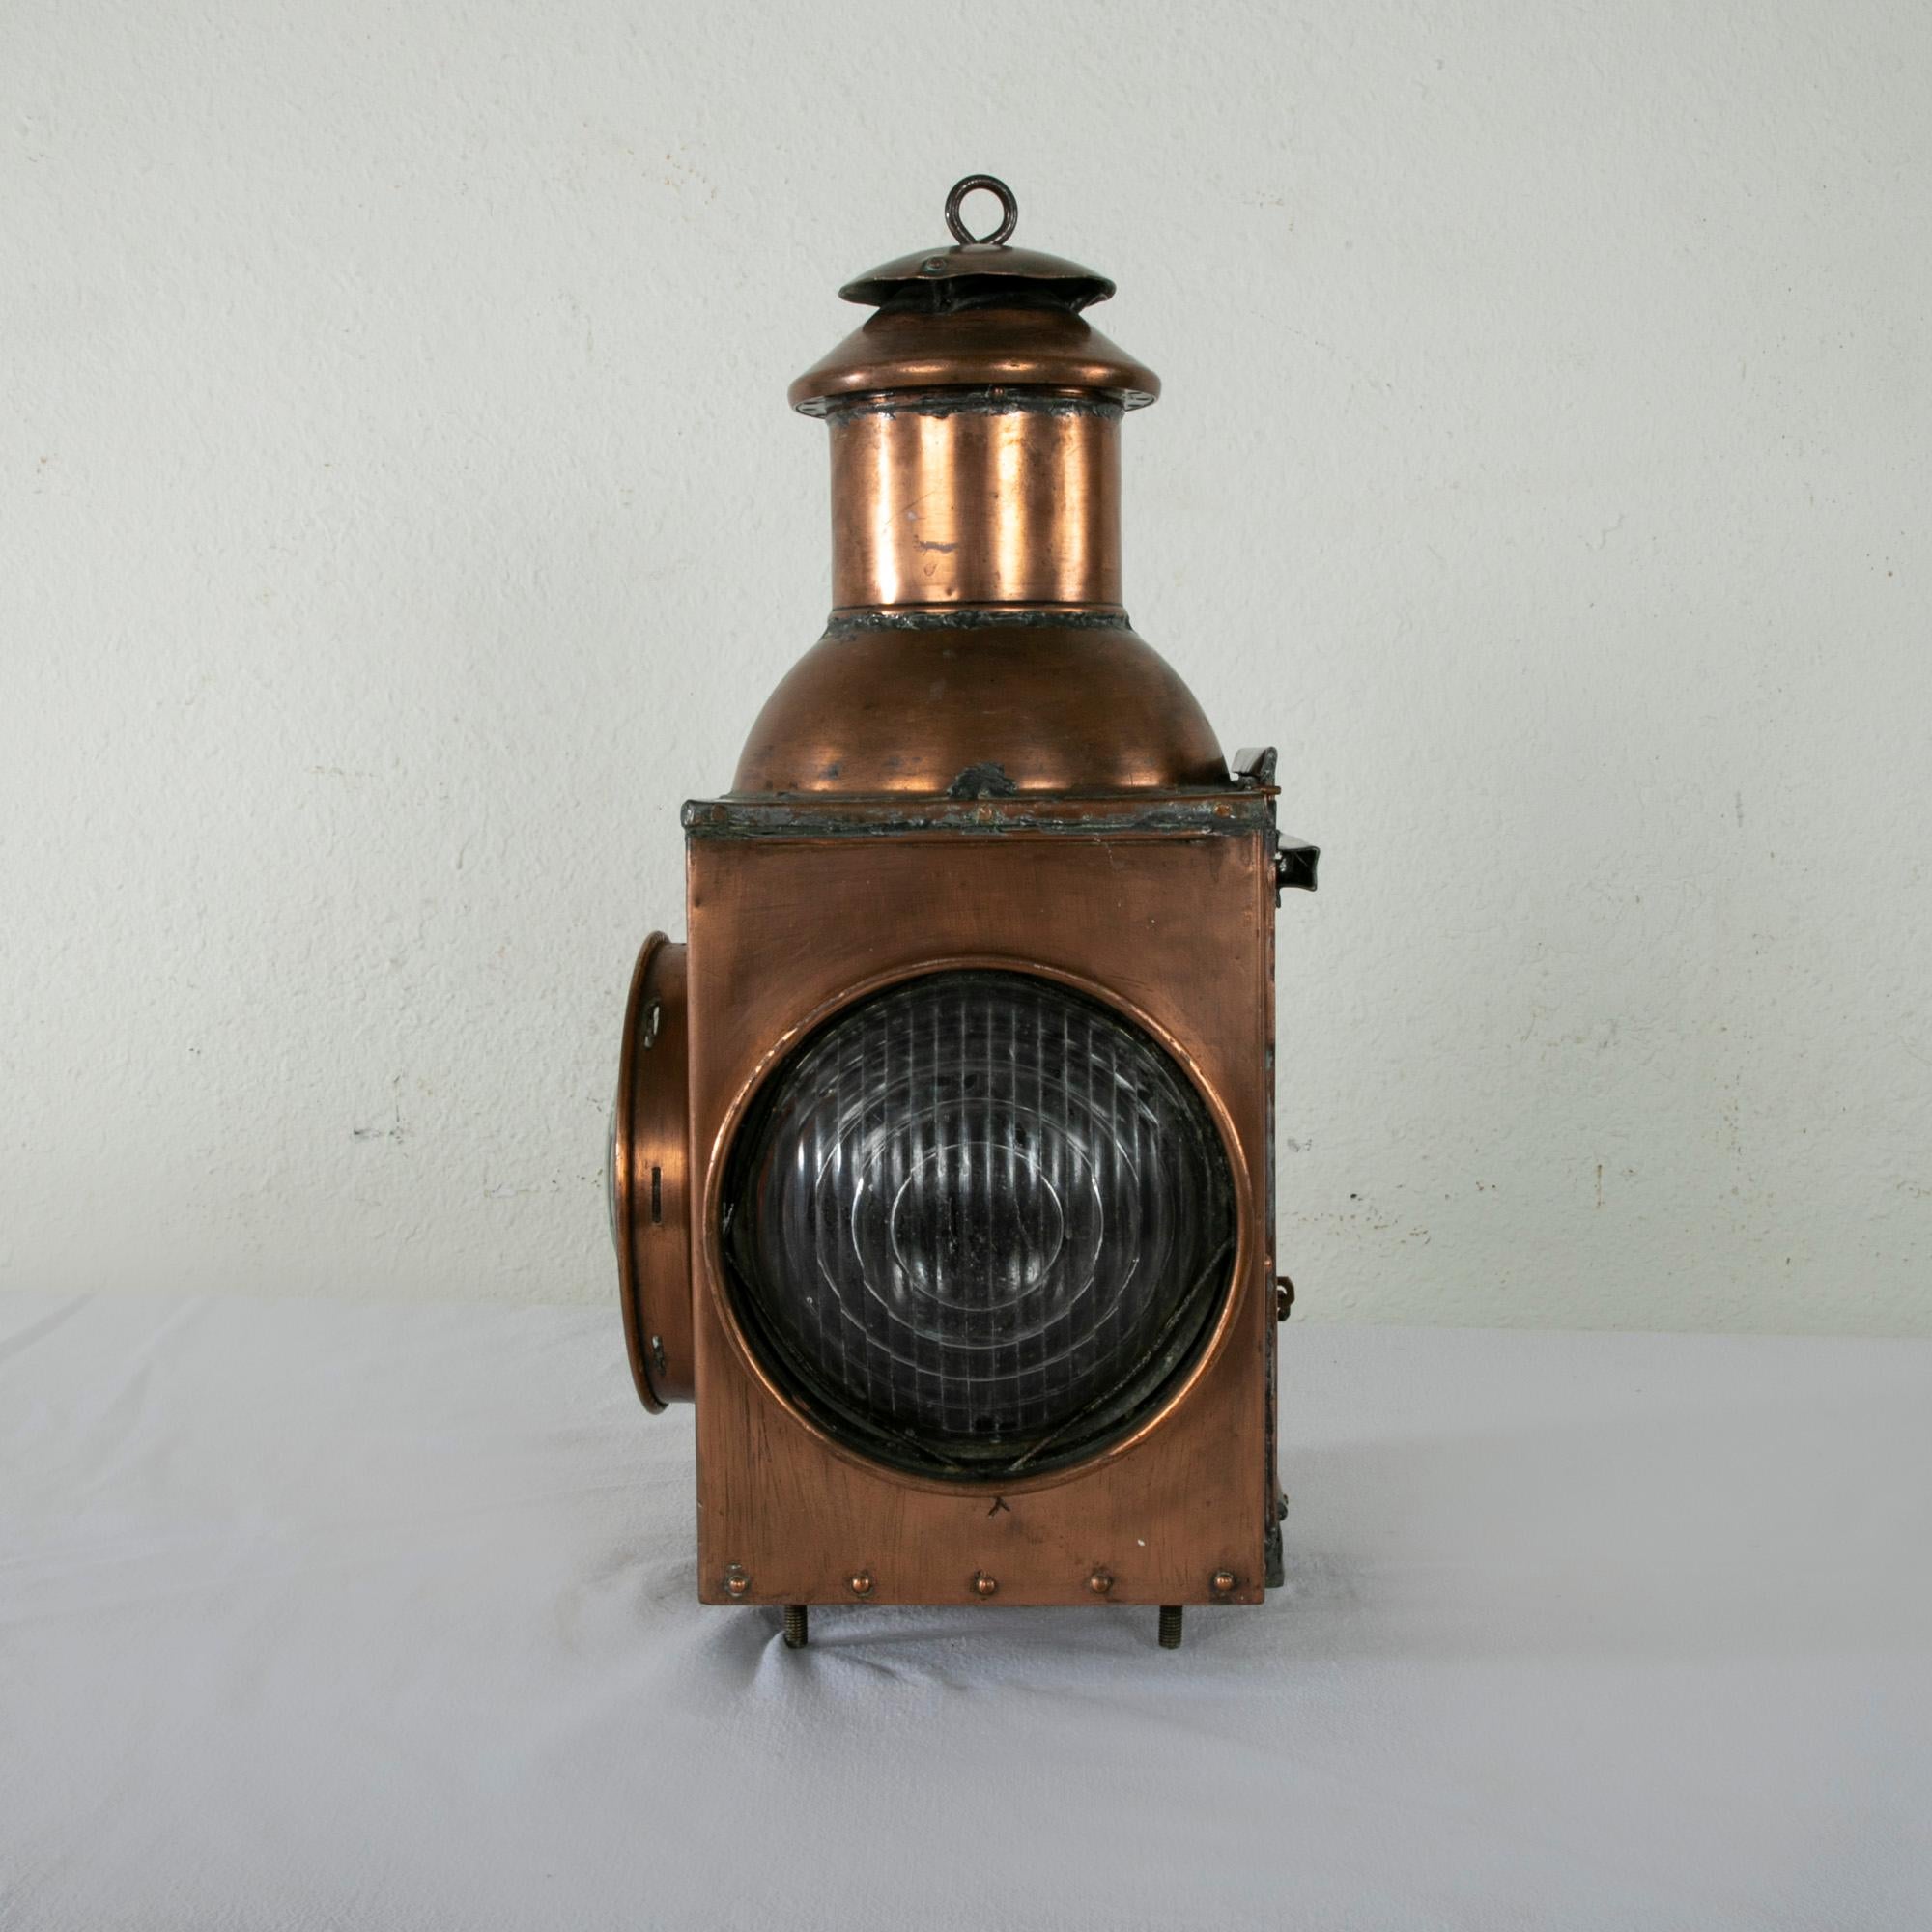 Originally used for signaling, this French copper railroad lantern from the late nineteenth century features glass on two sides one of which is tinted orange. A door on one side is stamped with the number 11 and slides up to allow access to the